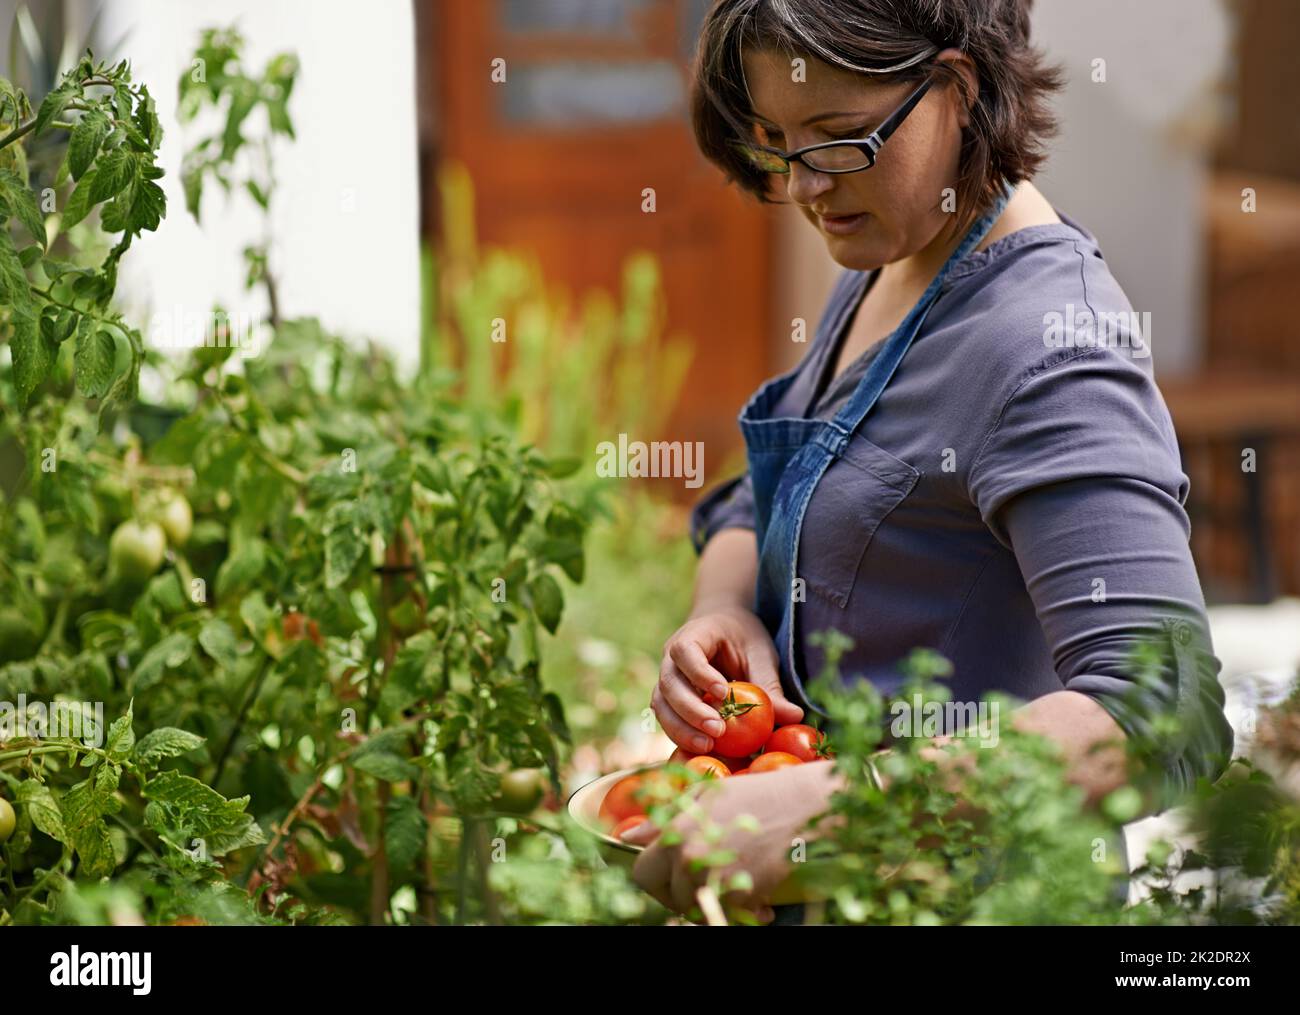 My tomatoes are looking lovely this season. A middle-aged woman picking home-grown tomatoes in her garden. Stock Photo